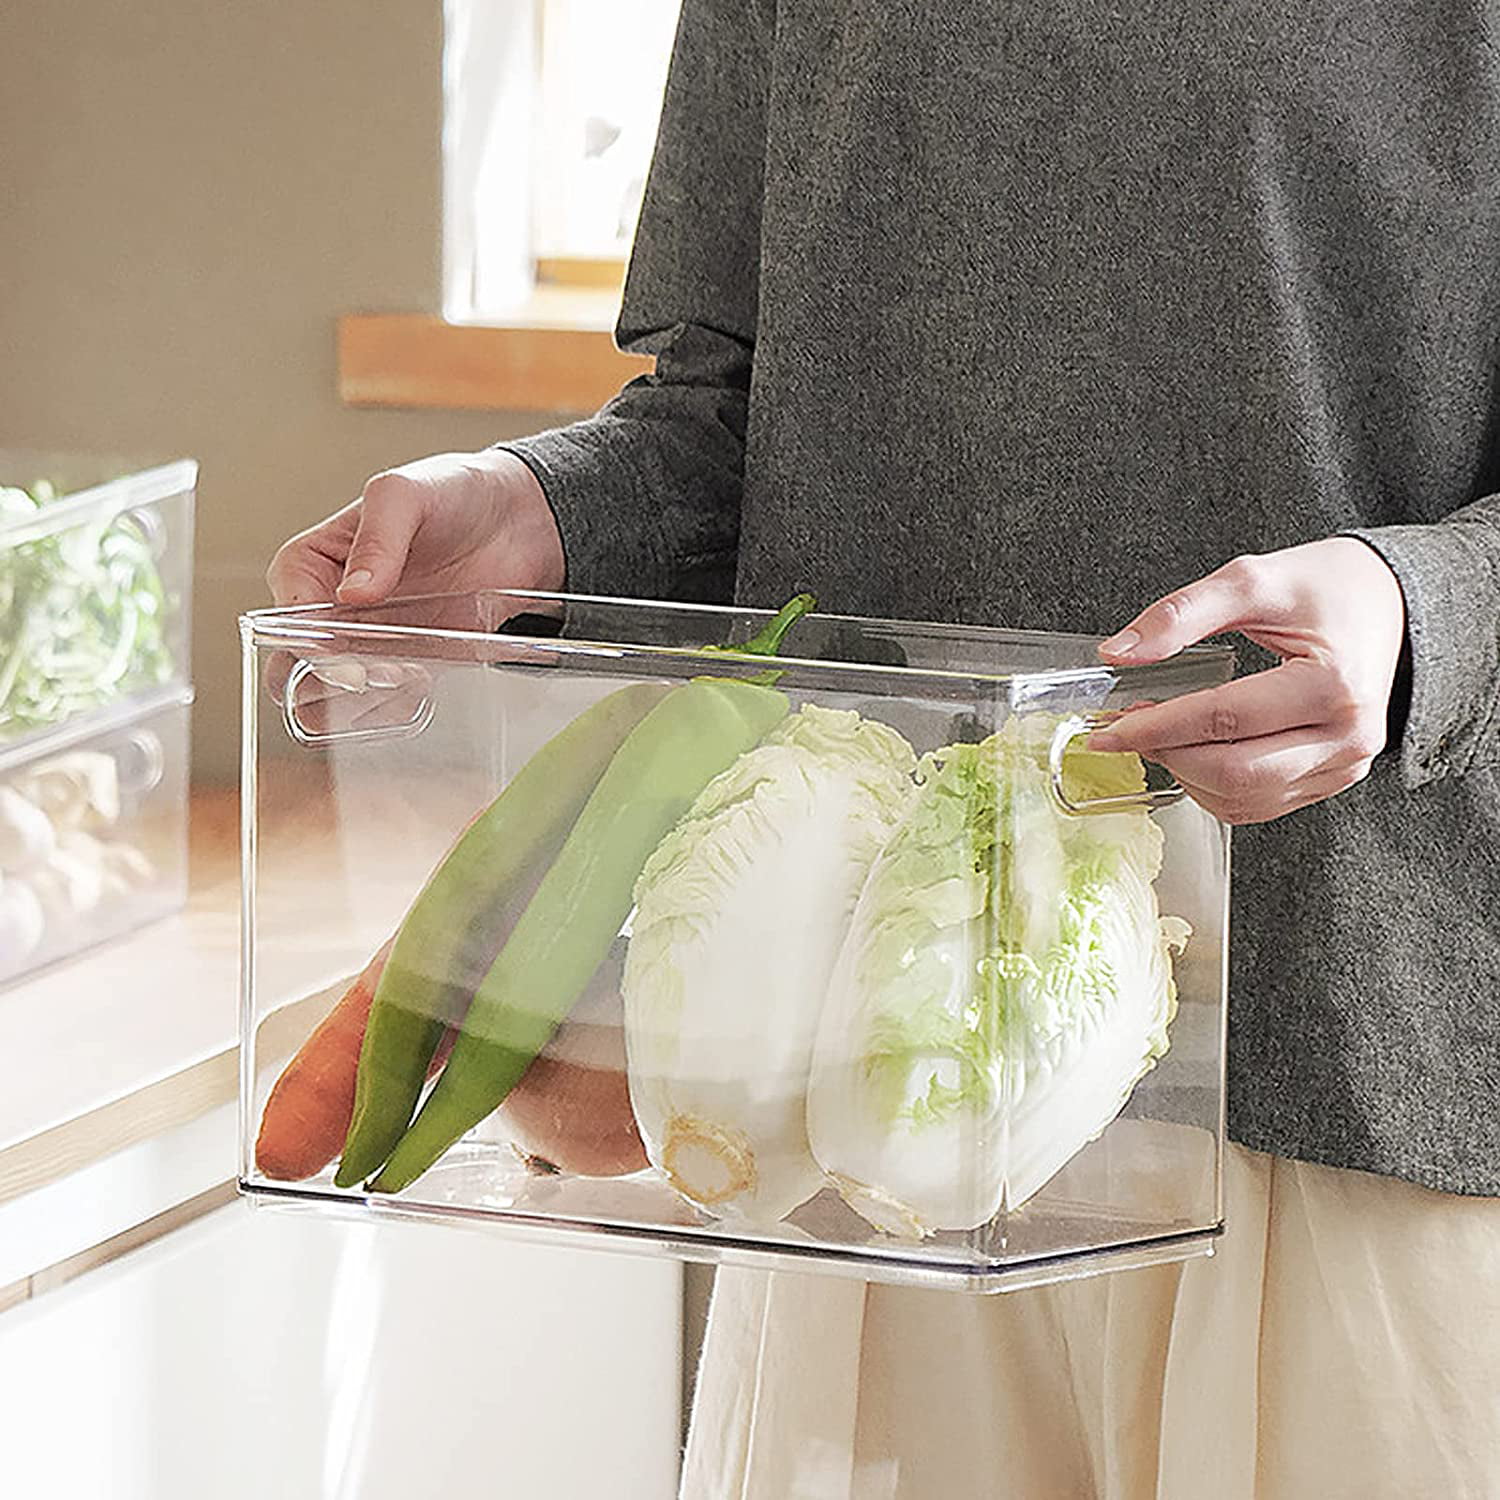  3 Pack Refrigerator Organizer Bins with Pull-out